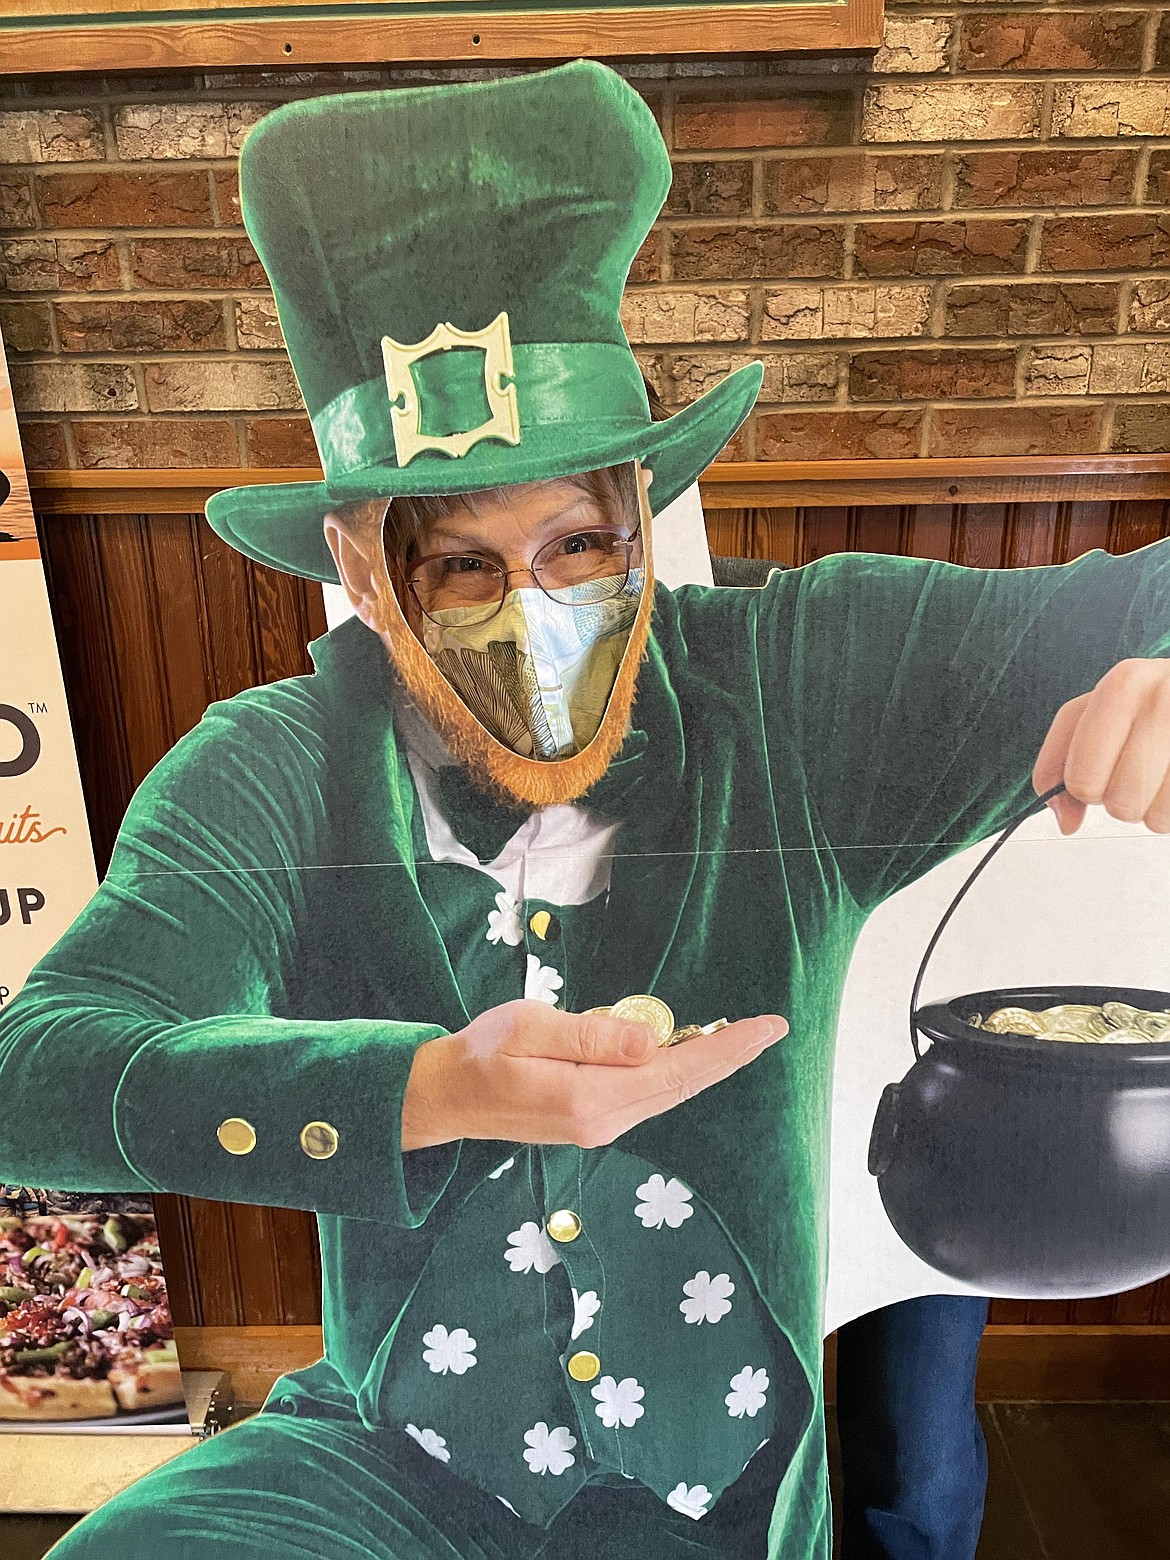 Local resident Cathy Dymkoski says “Top o’ the mornin’ to ya!” on the one day when everybody is Irish.